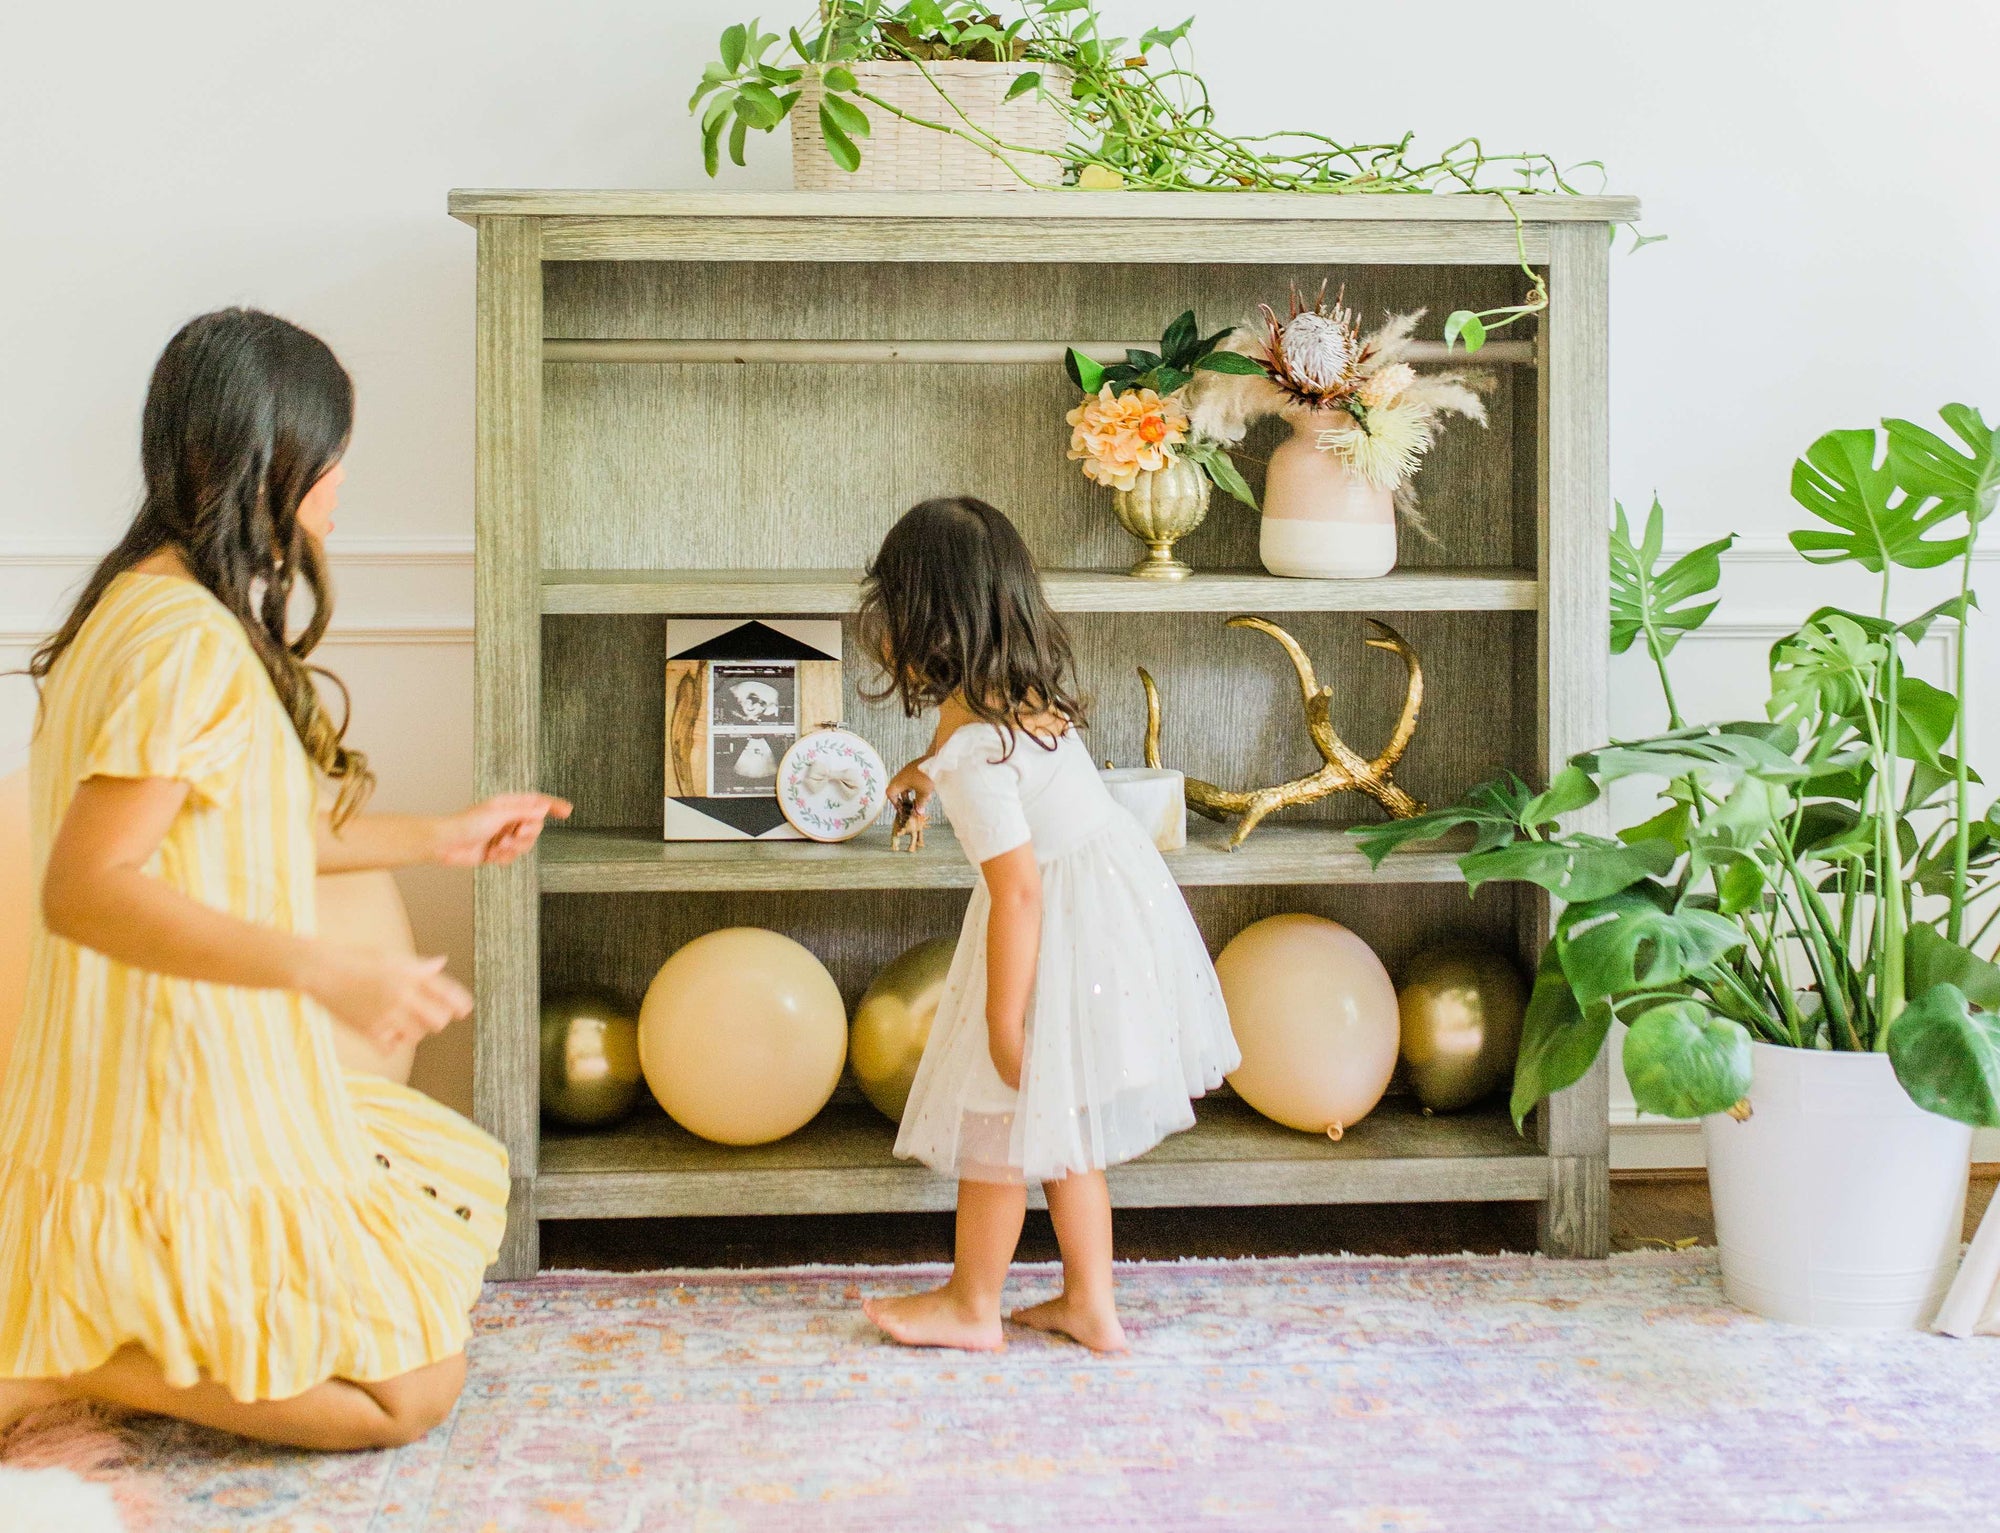 MILK STREET NIGHTSTANDS + HUTCHES: PACKED FULL OF CONVENIENT FEATURES FOR NEW FAMILIES